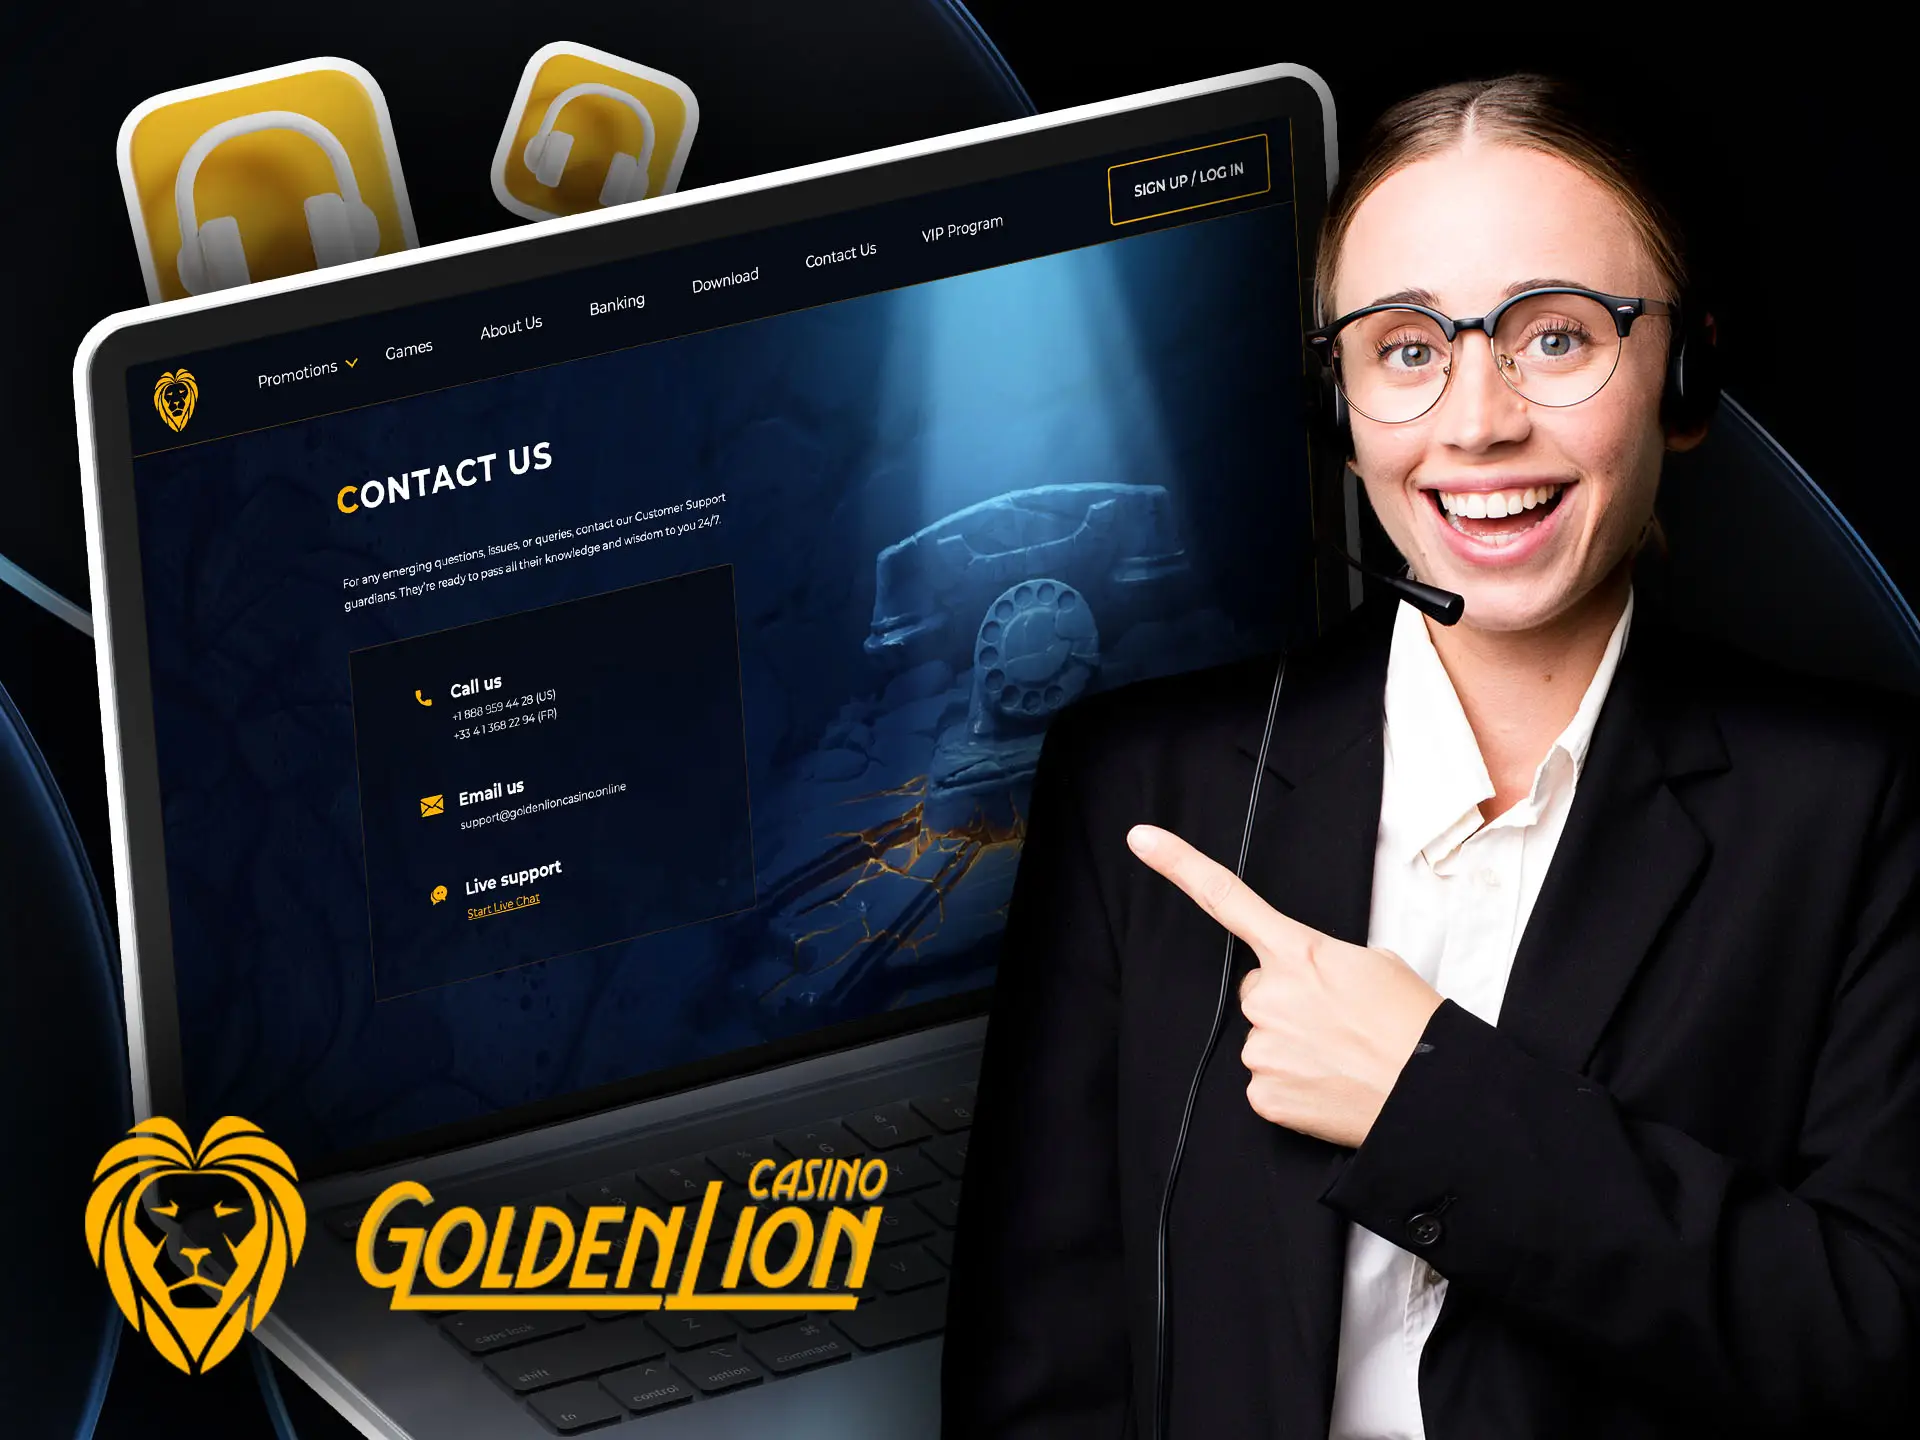 How to contact Golden Lion support for Australia.